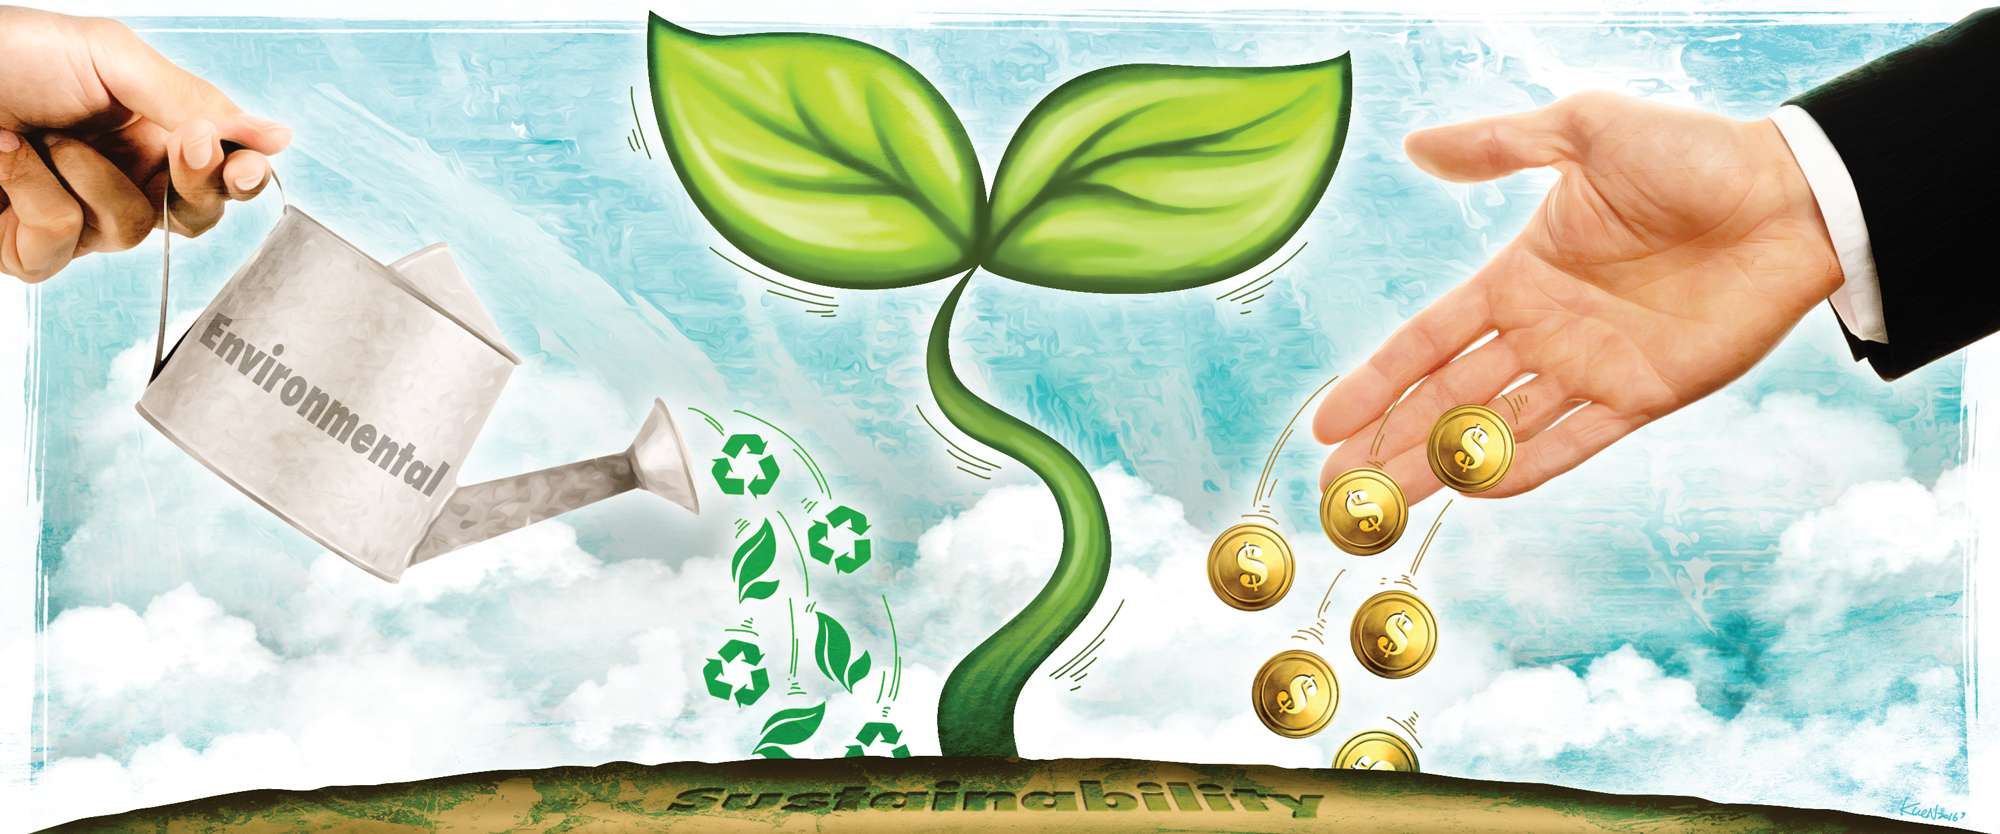 India & Environment- http://www.scmp.com/business/global-economy/article/1956350/finding-balance-between-economic-and-environmental